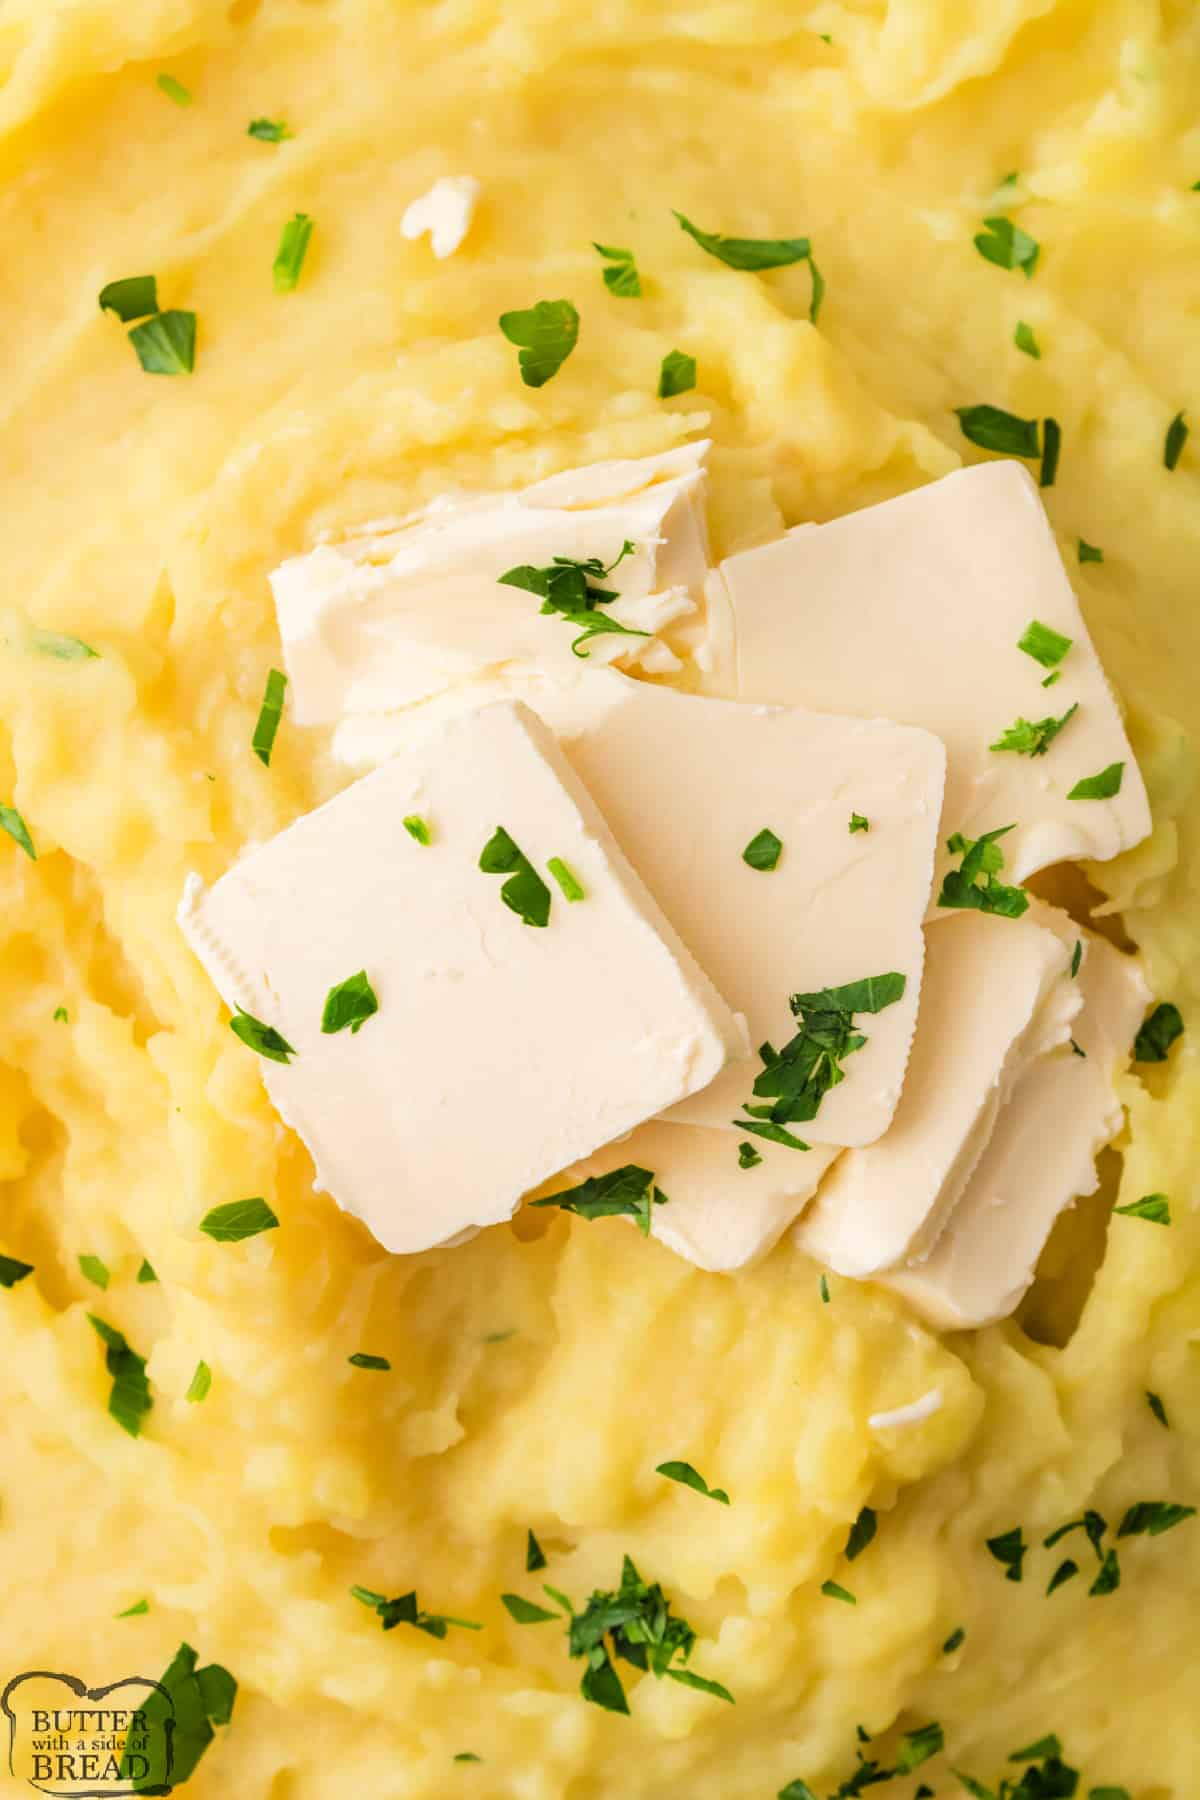 Large serving of mashed potatoes with butter